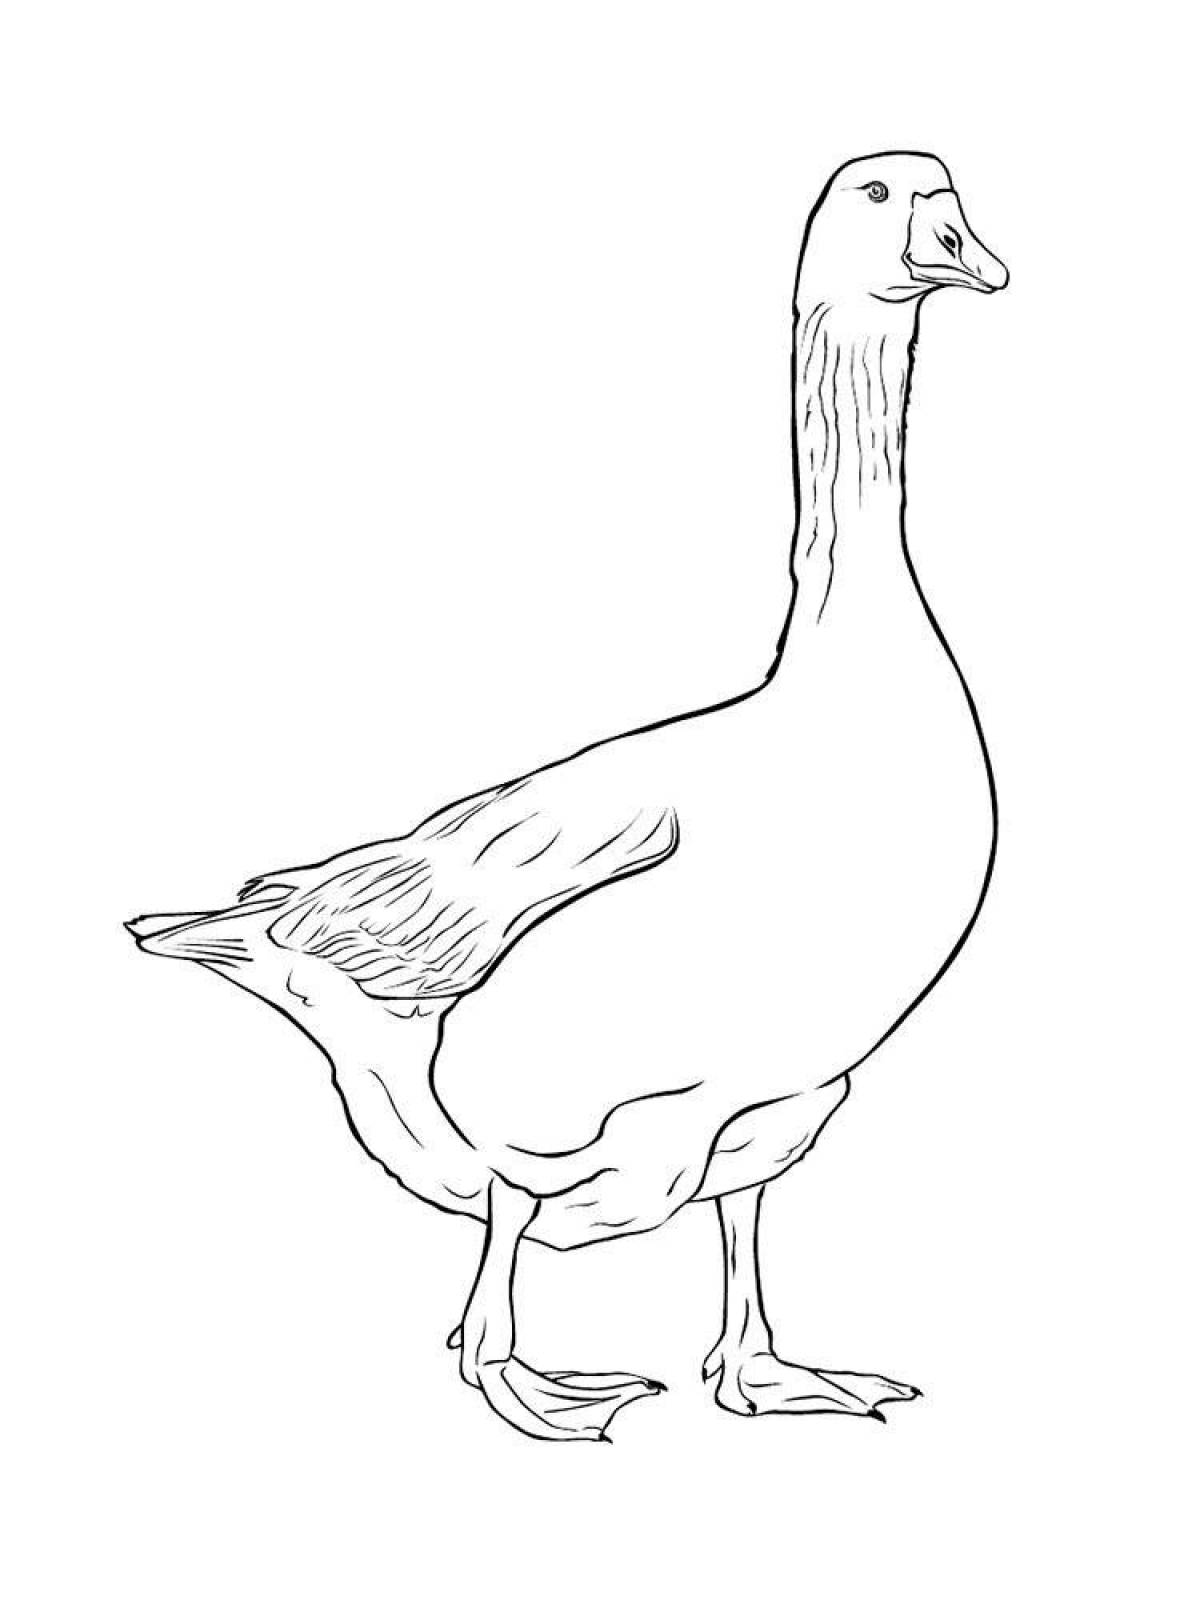 Playtime goose coloring page for kids